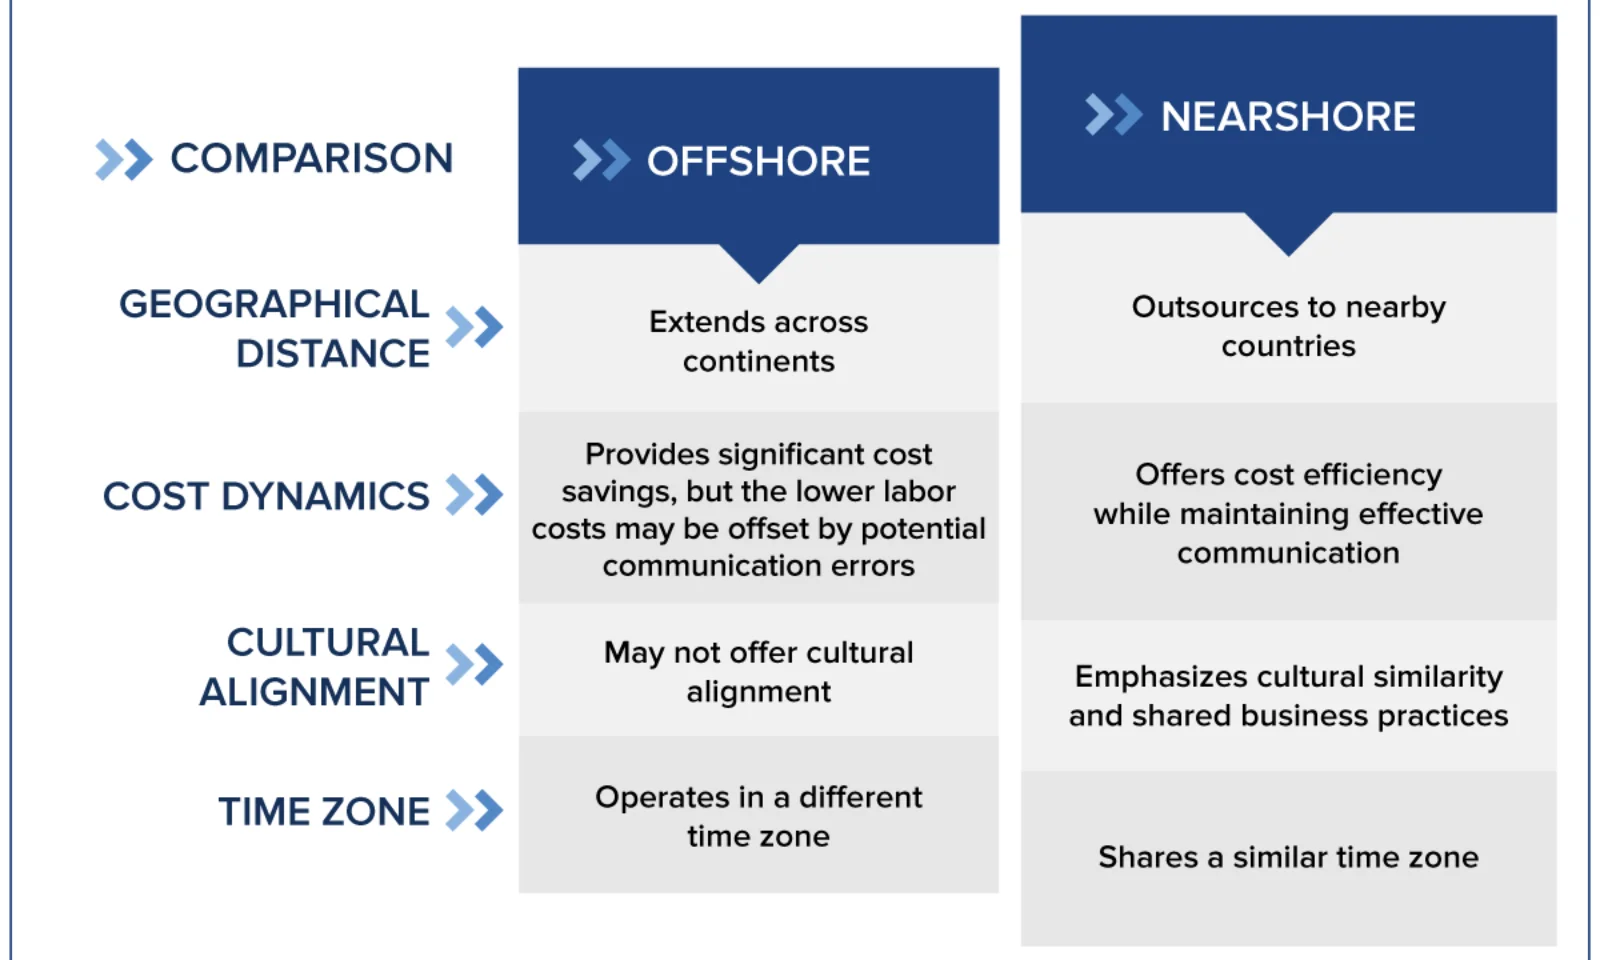 Chart comparing the benefits of Offshore and Nearshore delivery models for companies.